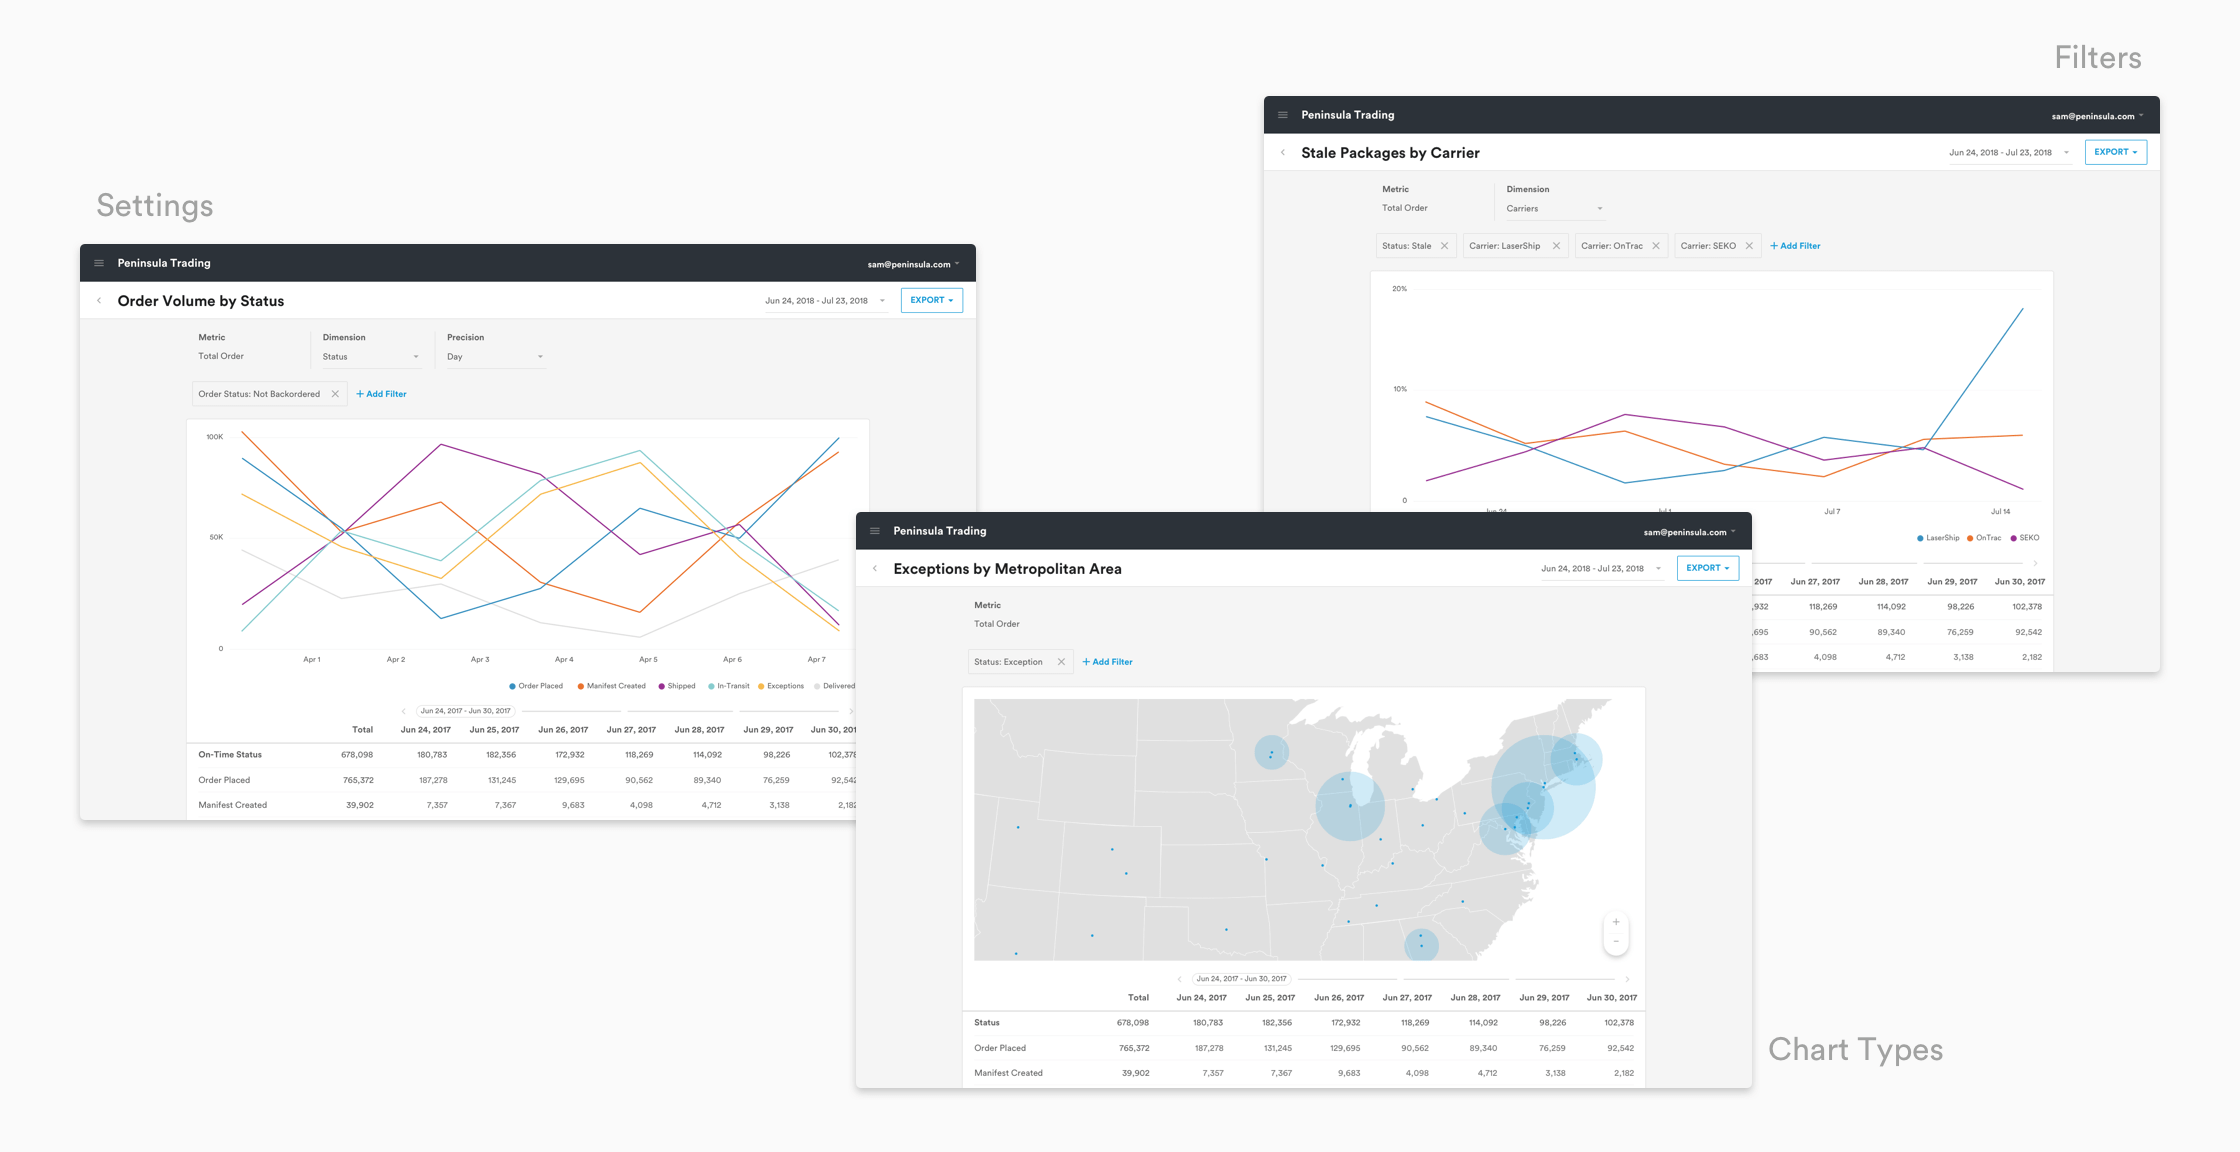 Explore Data to Extract Insights